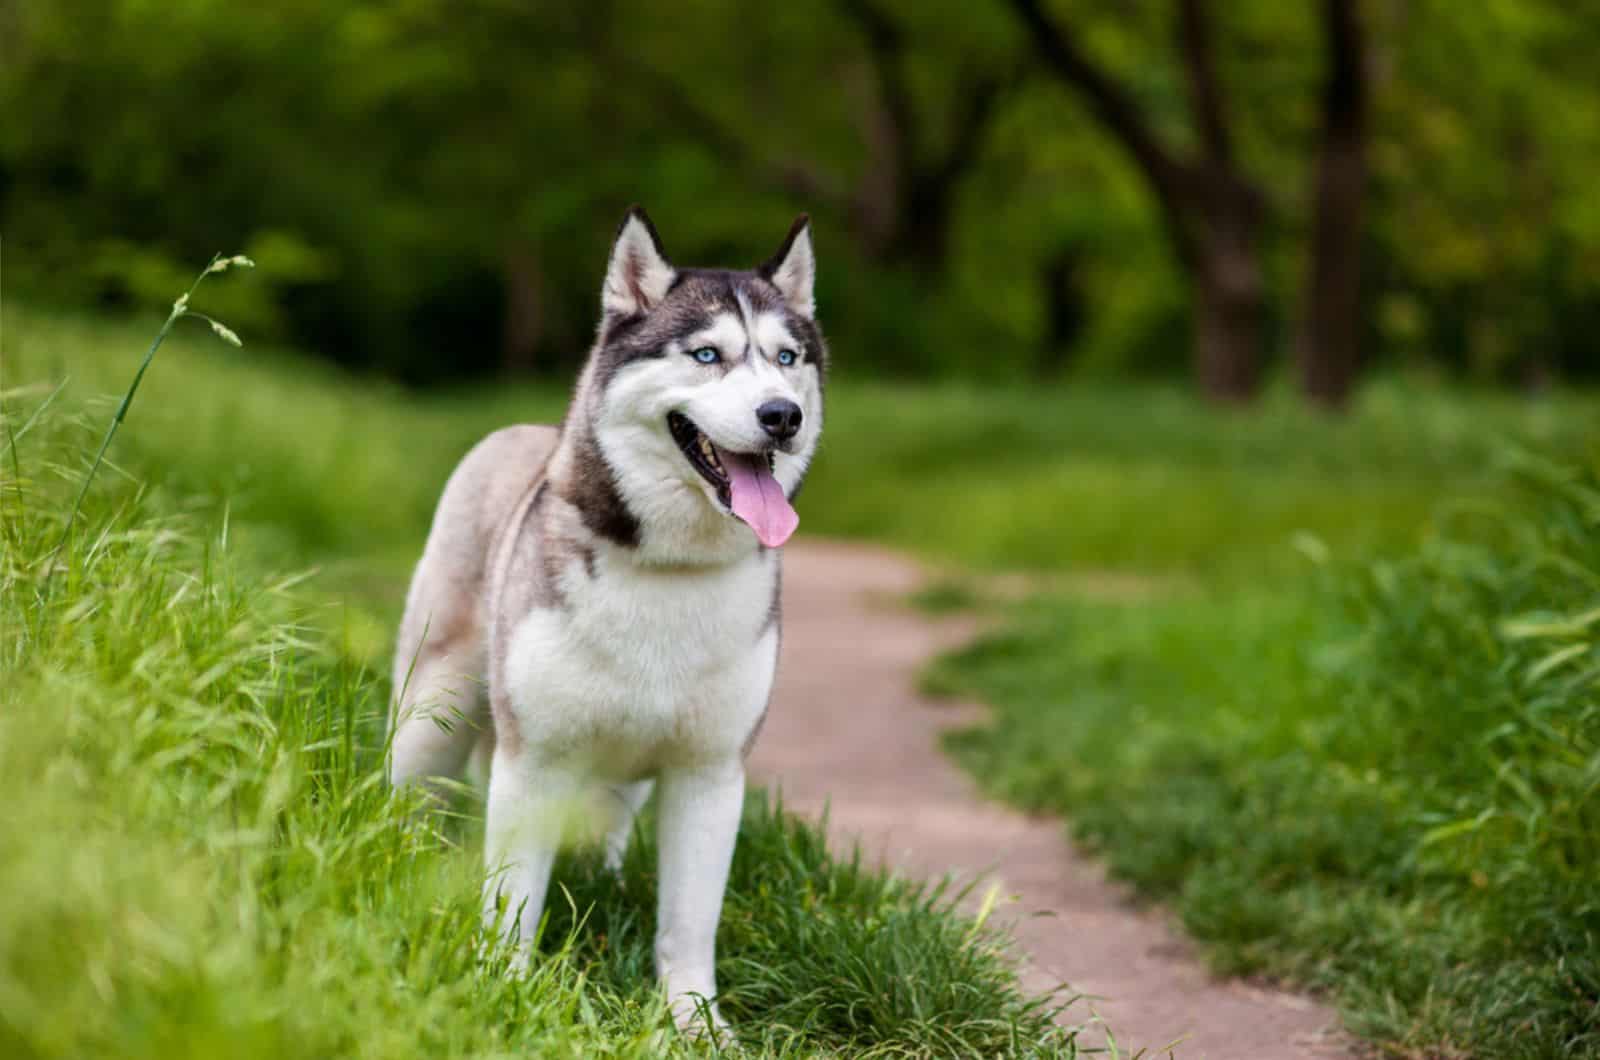 Siberian husky dog with blue eyes stands and looks ahead